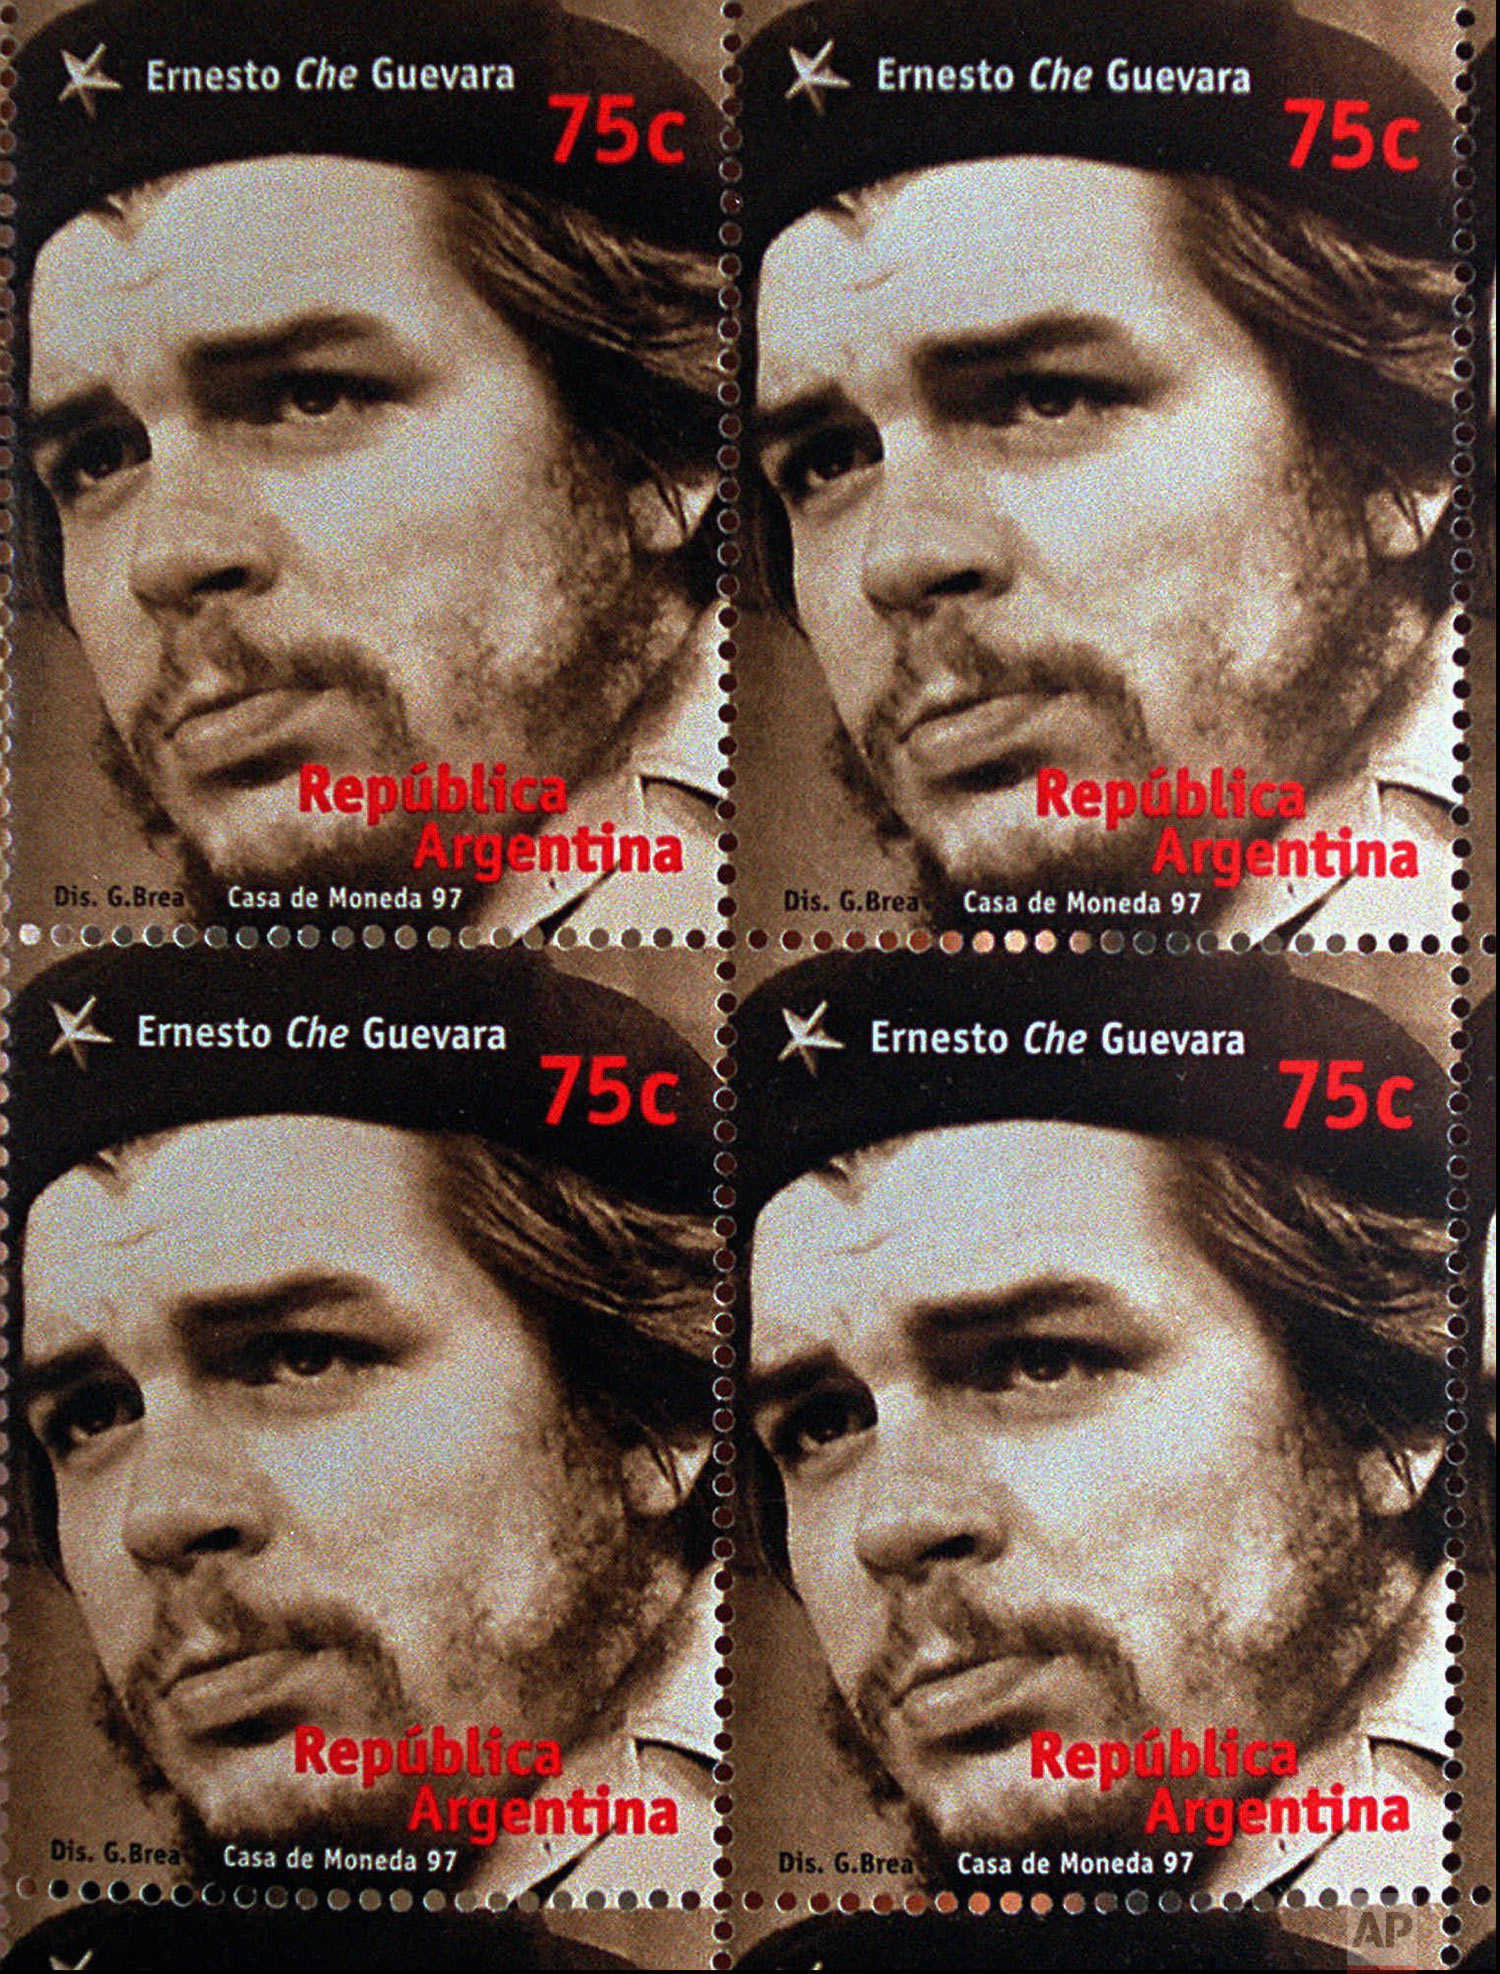  This photo shows mail stamps issued by the recently-privatized Argentine postal service to commemorate the 30th anniversary of the death of Argentine guerrilla leader Ernesto "Che" Guevara, executed by Bolivian army soldiers along with six fellow re